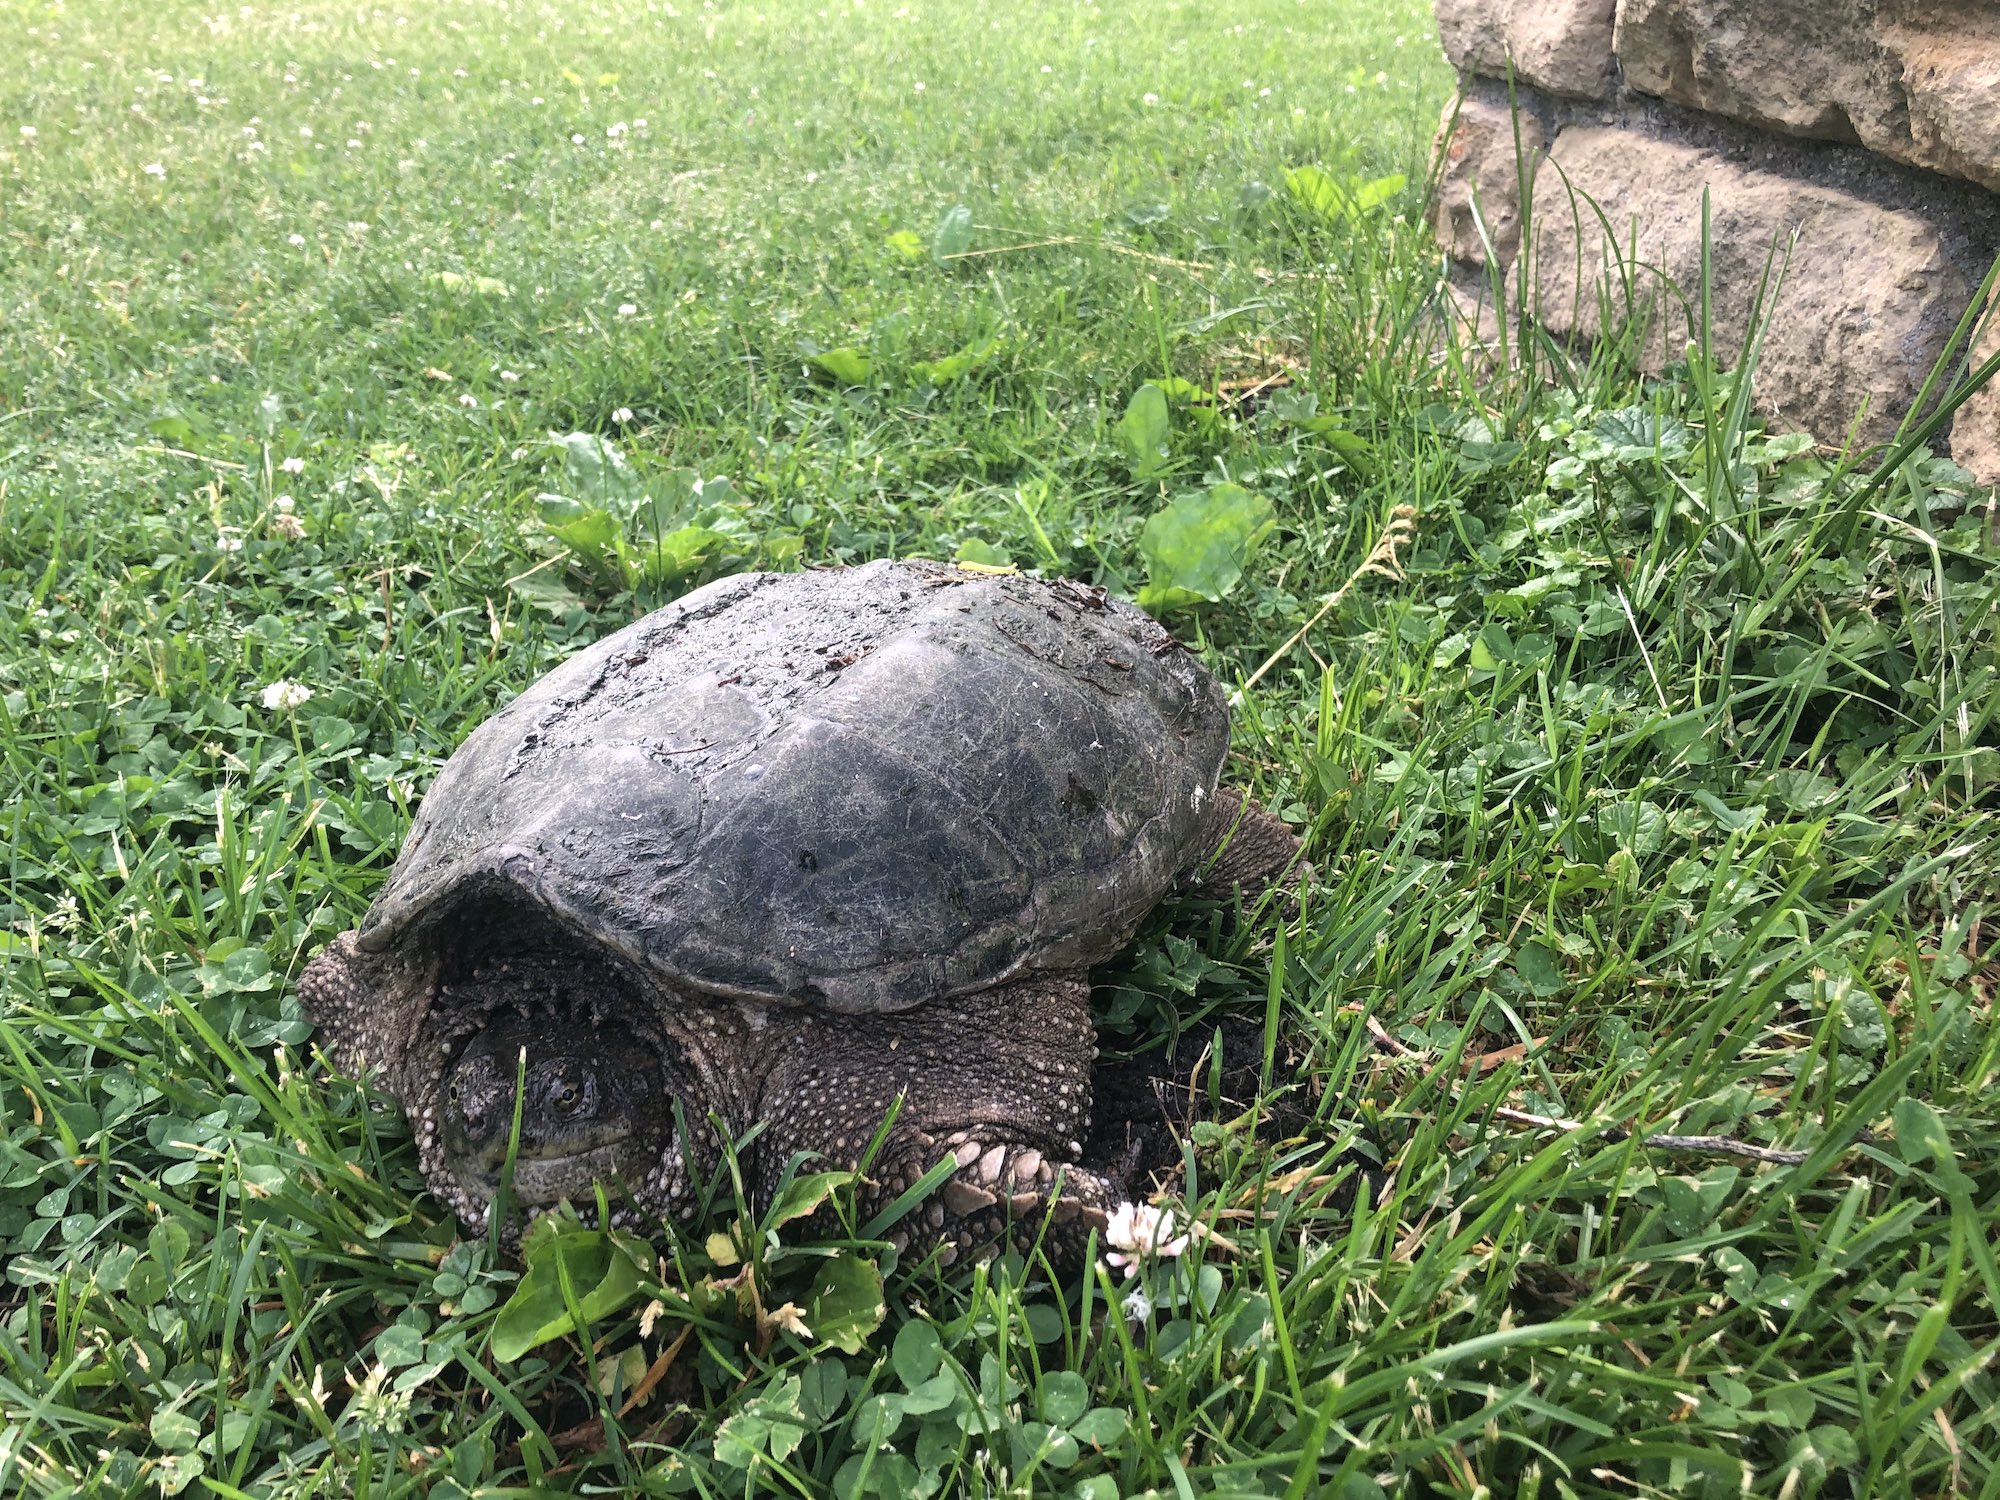 Snapping Turtle in E. Ray Stevens Pond and Aquatic Gardens on corner of Manitou Way and Nakoma Road in Madison, Wisconsin on June 10, 2020.